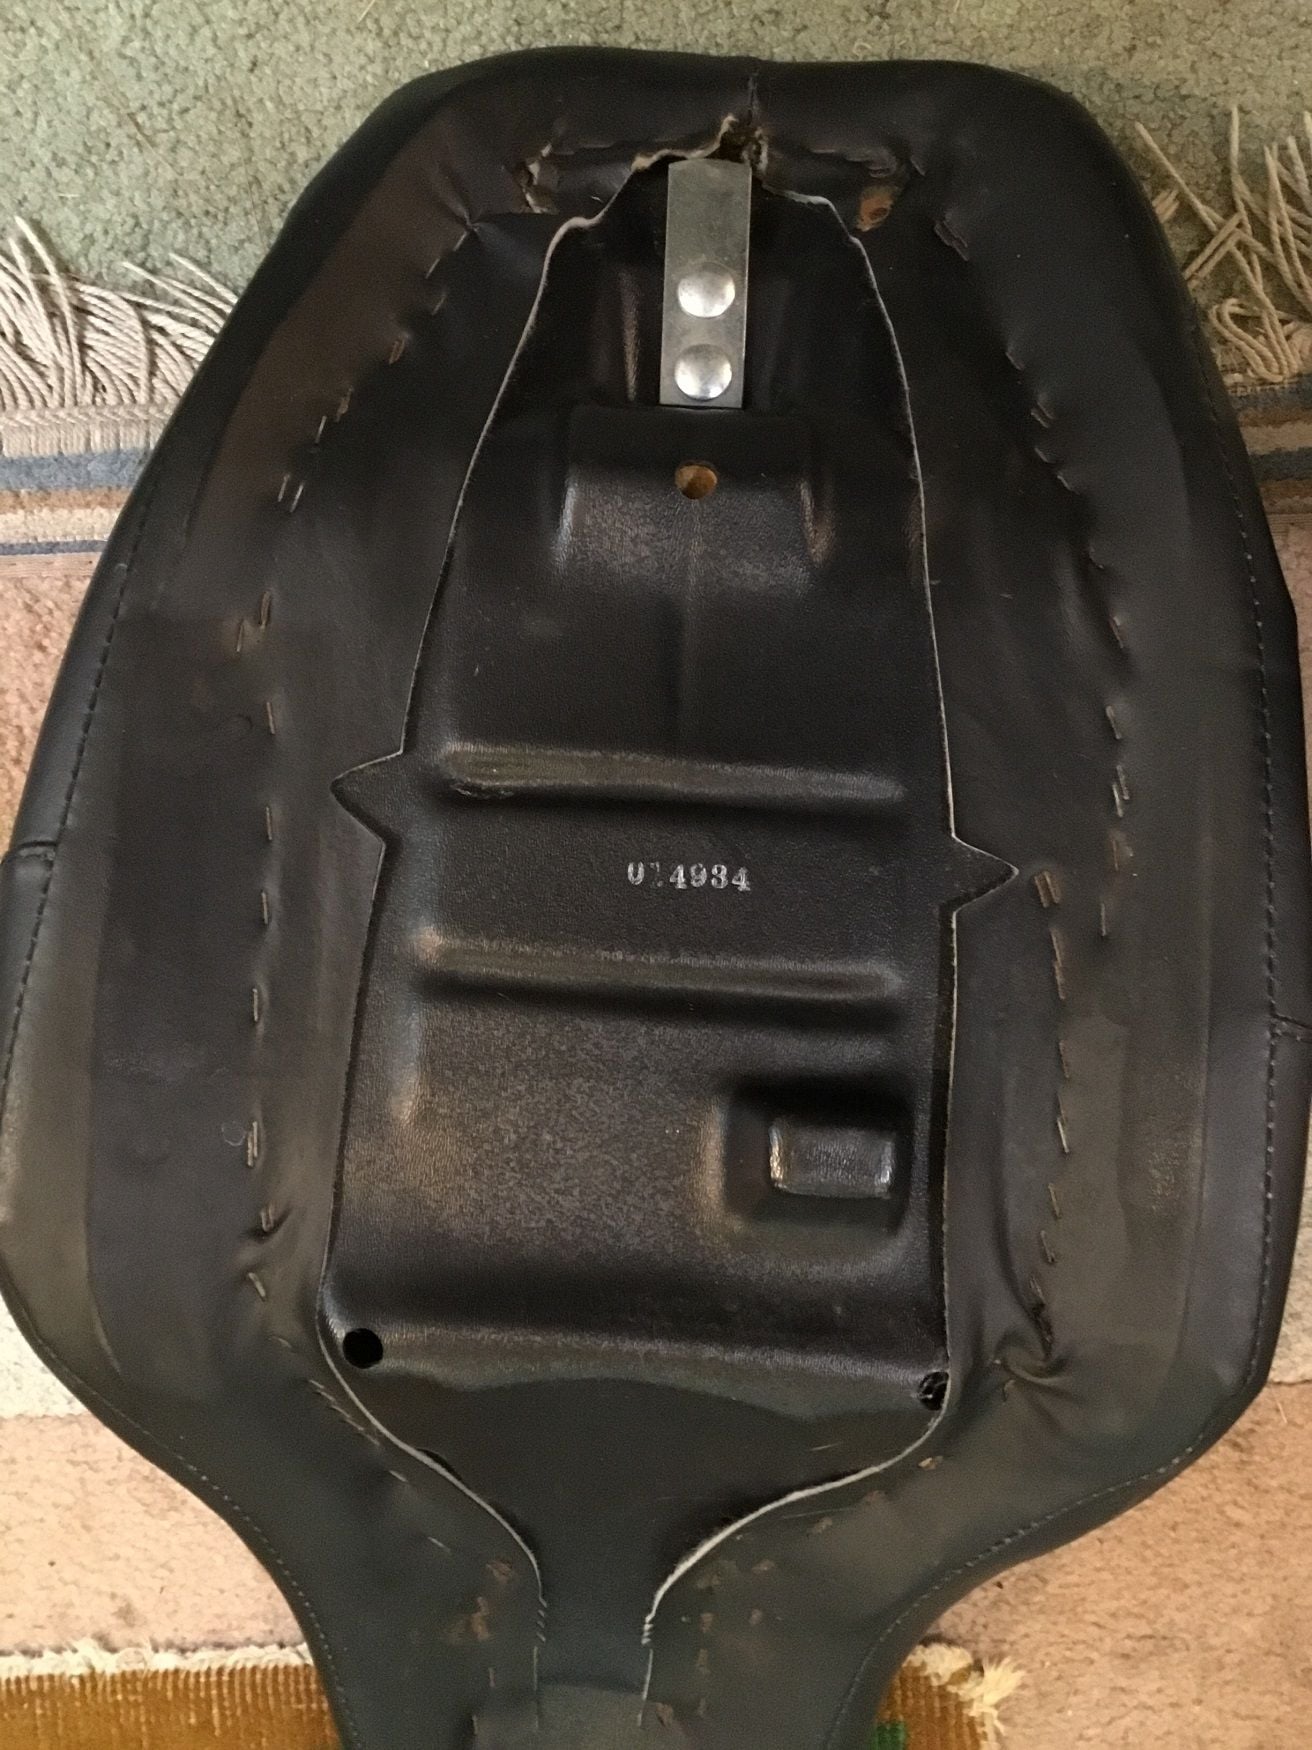 Help with identifying a seat. - Harley Davidson Forums